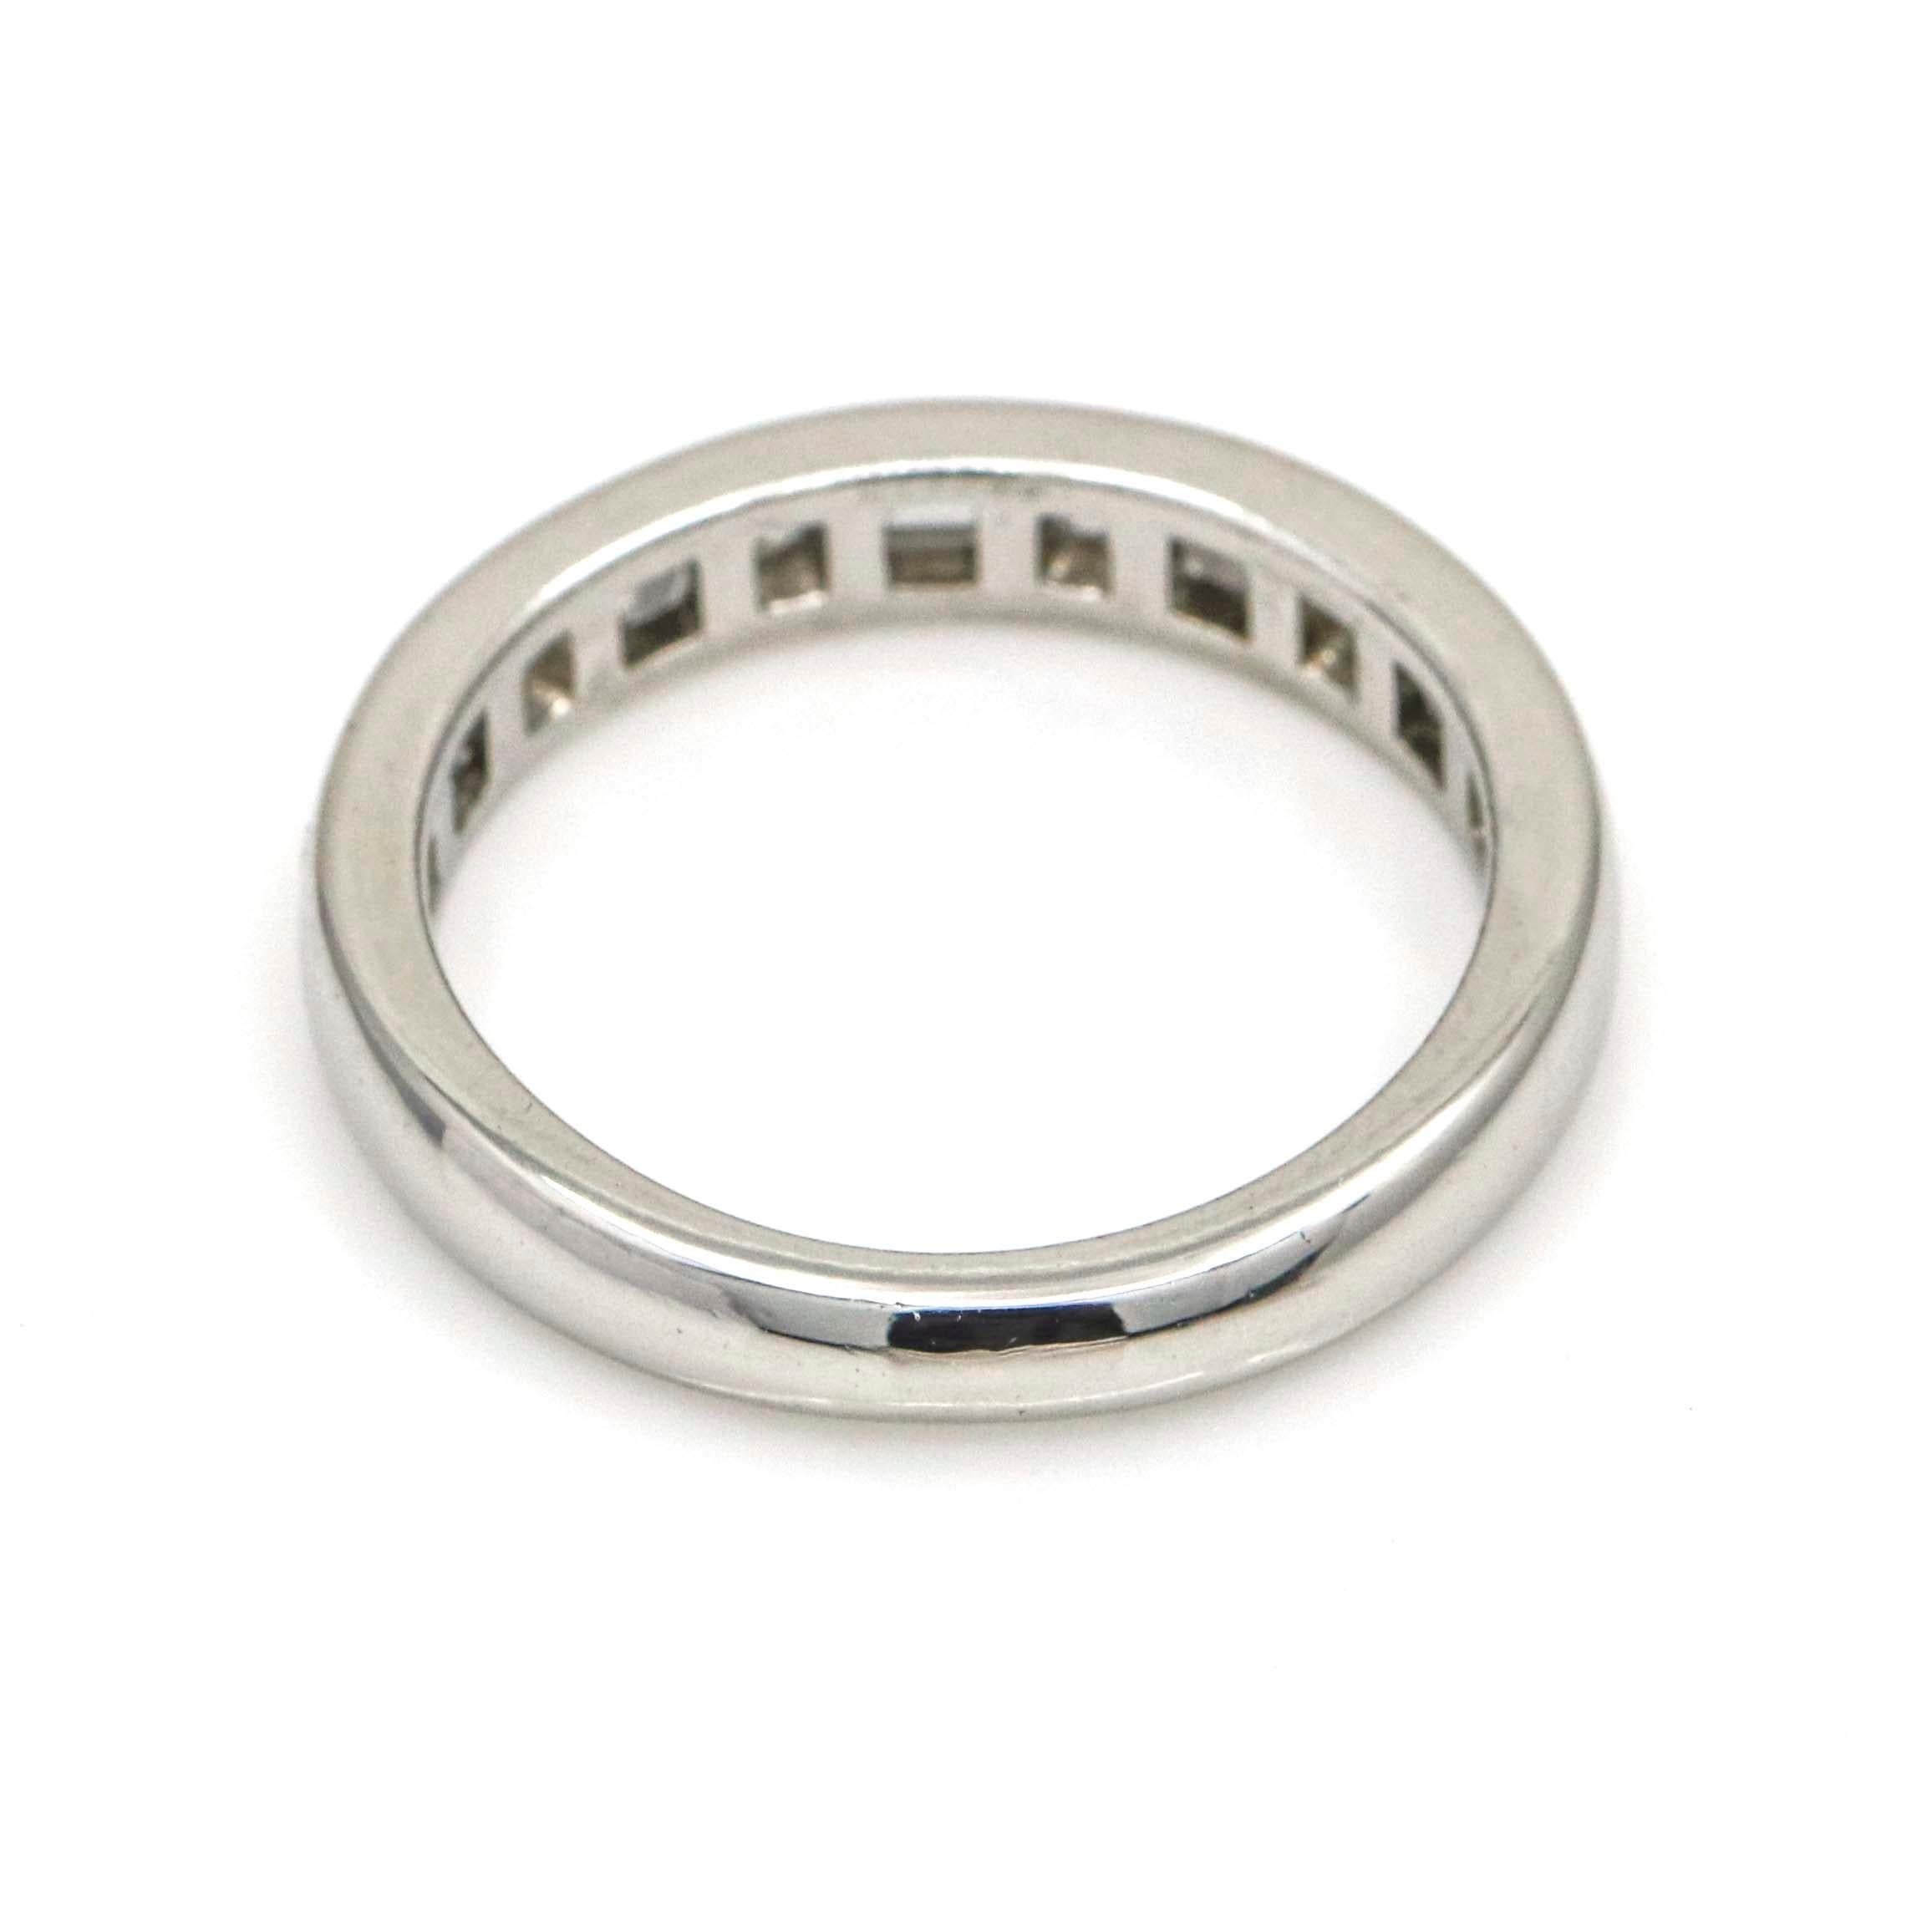 Tiffany & Co. Women's Round Baguette Diamond Band Ring in Platinum In Excellent Condition For Sale In Boca Raton, FL